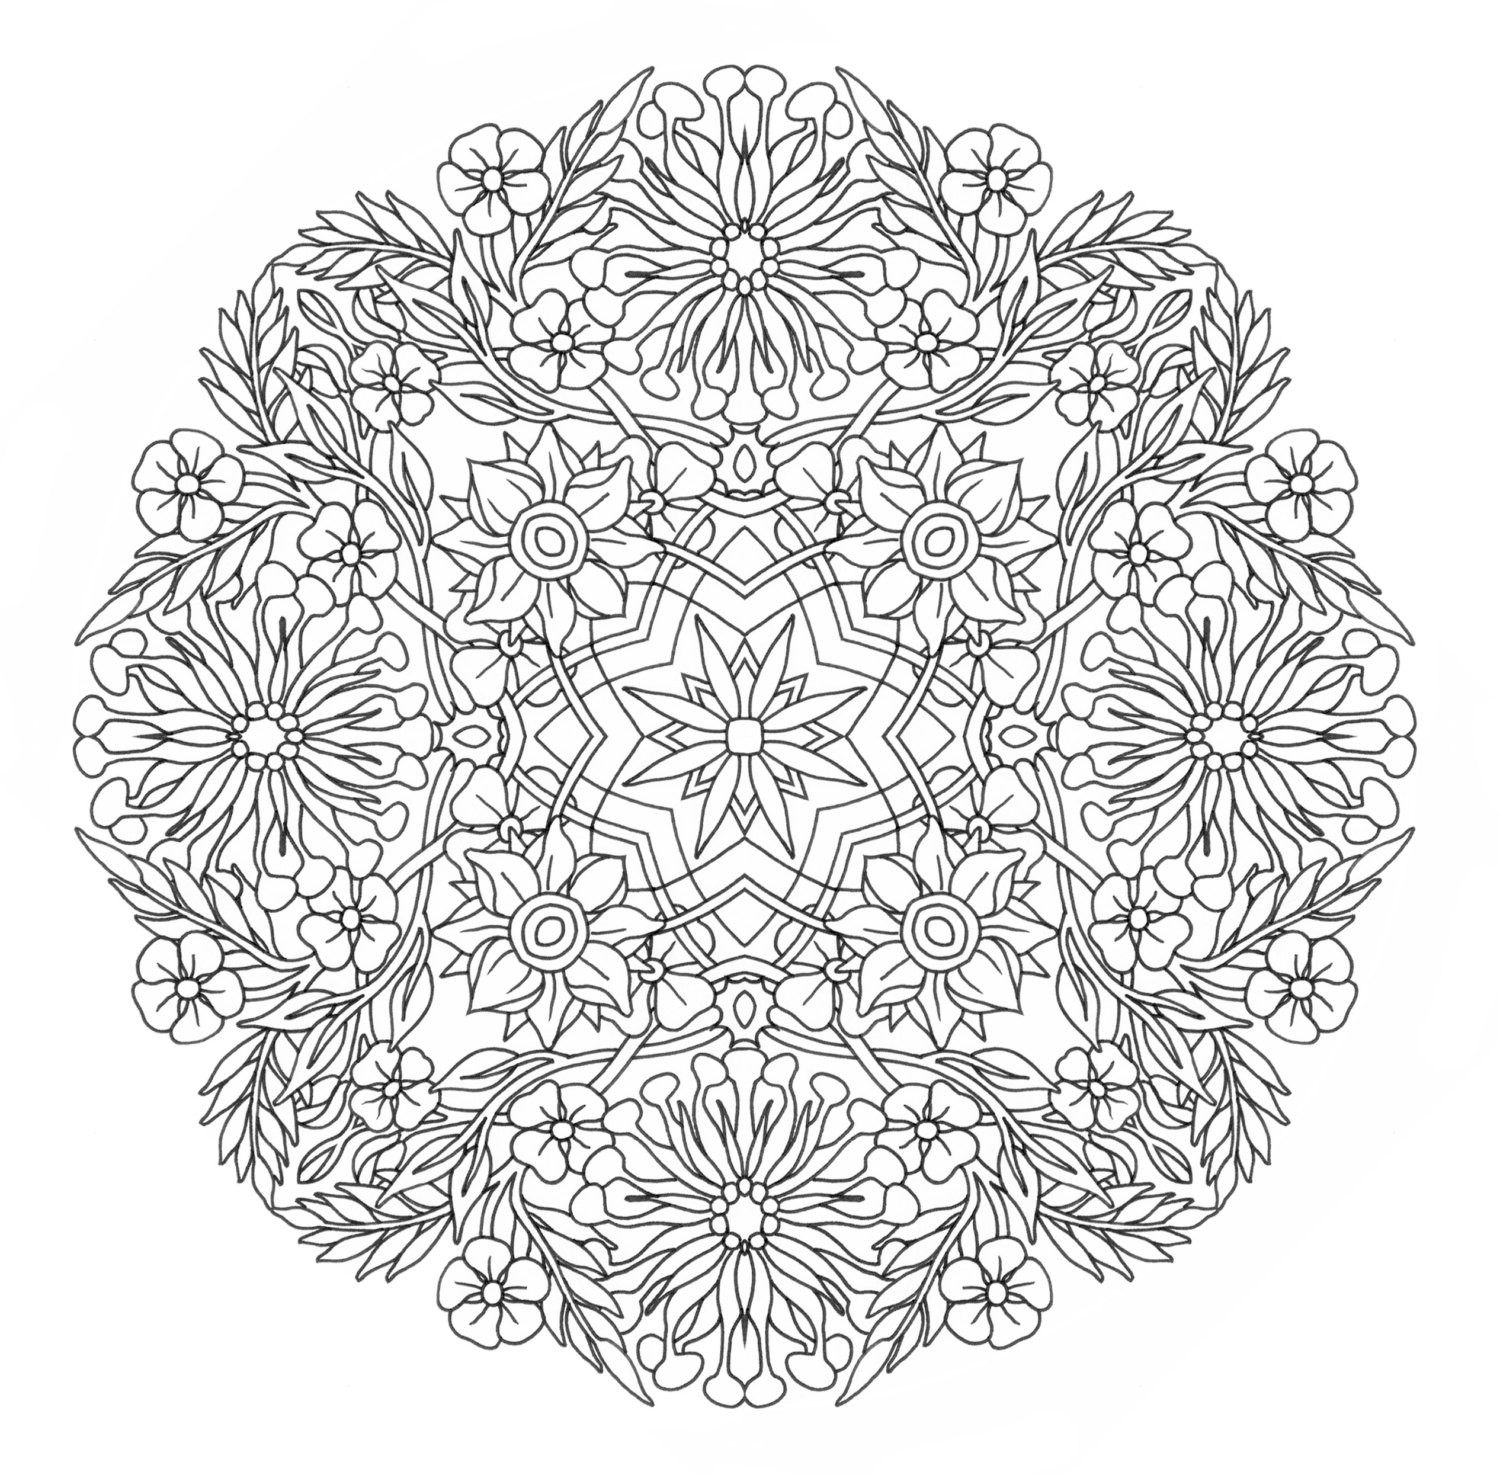 Free Mandala Coloring Pages For Adults
 Printable Coloring Page Honey Suckle Mandala by emerlyearts